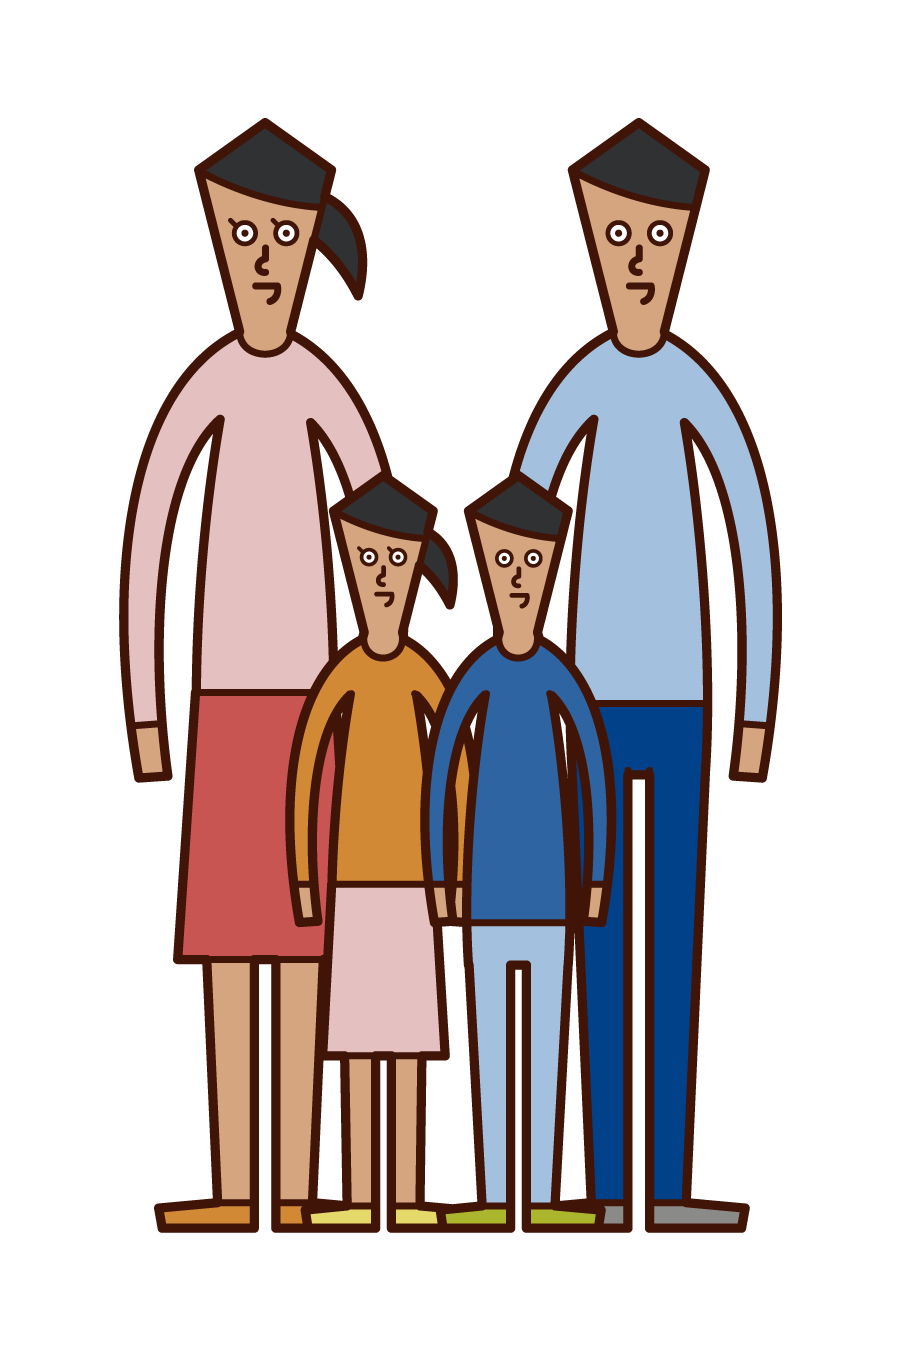 Illustration of a family of four